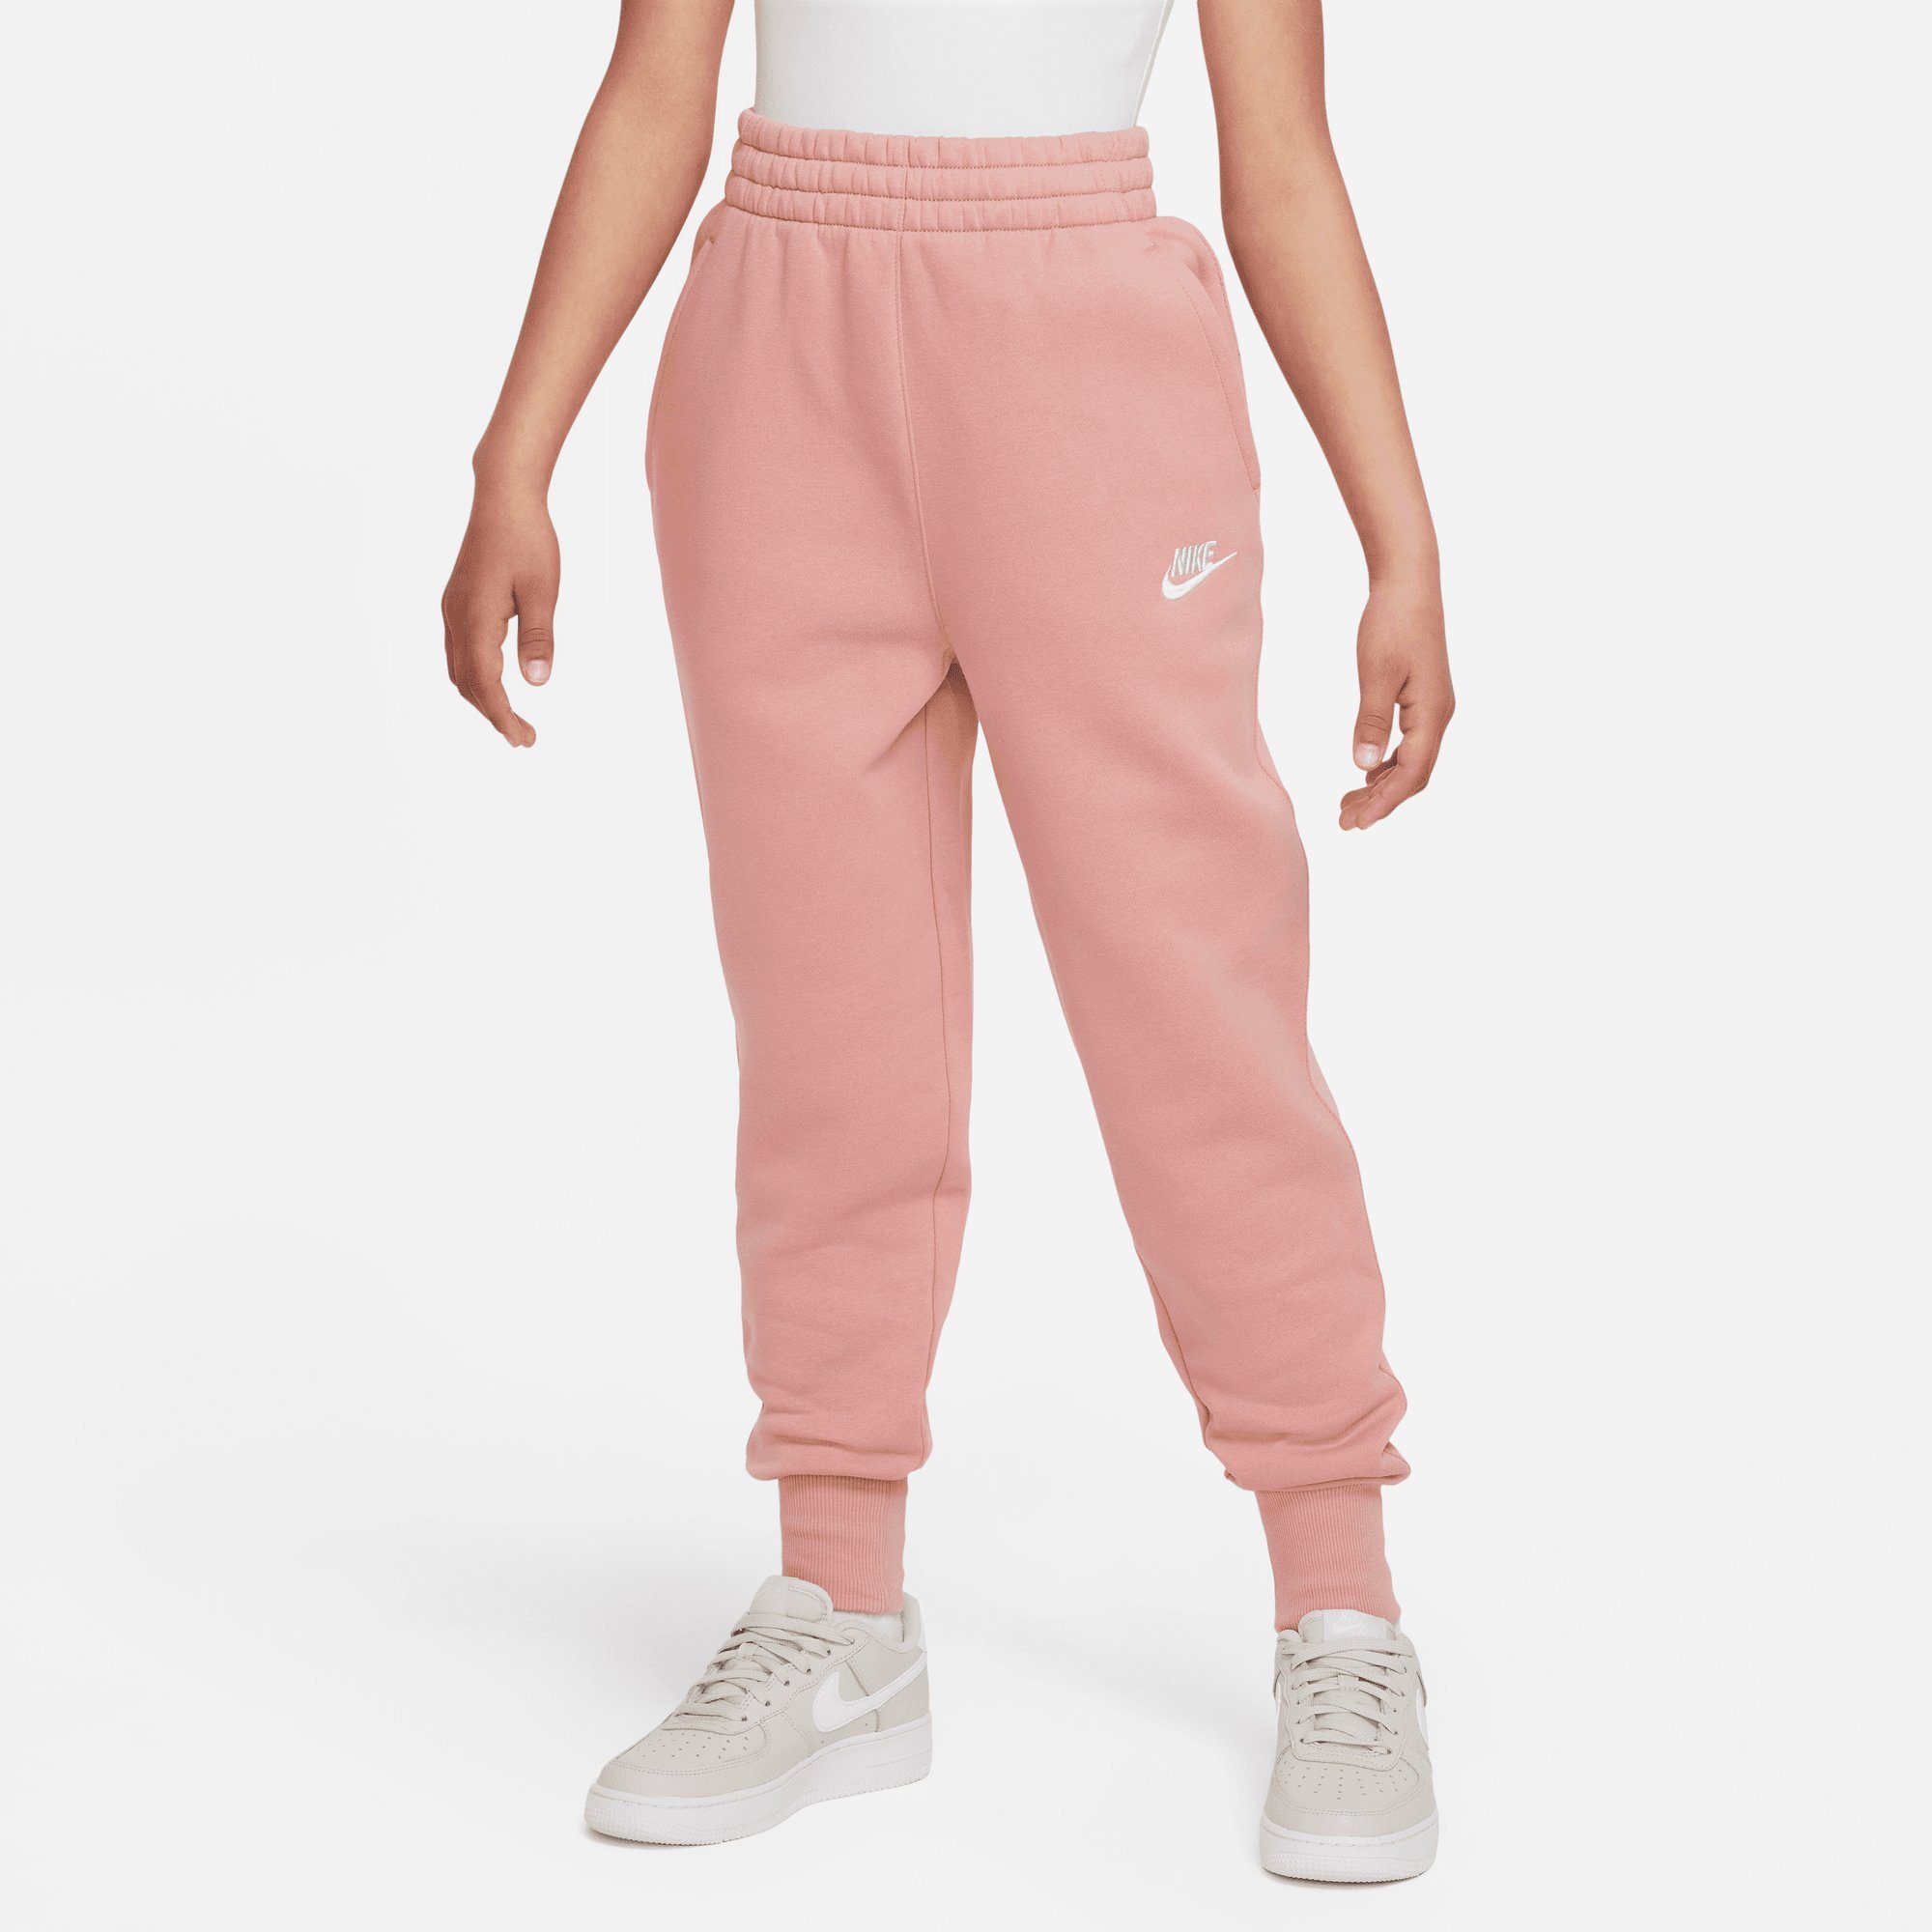 Nike Sportswear Jogginghose CLUB STARDUST/RED STARDUST/WHITE KIDS' RED FITTED FLEECE PANTS HIGH-WAISTED BIG (GIRLS)